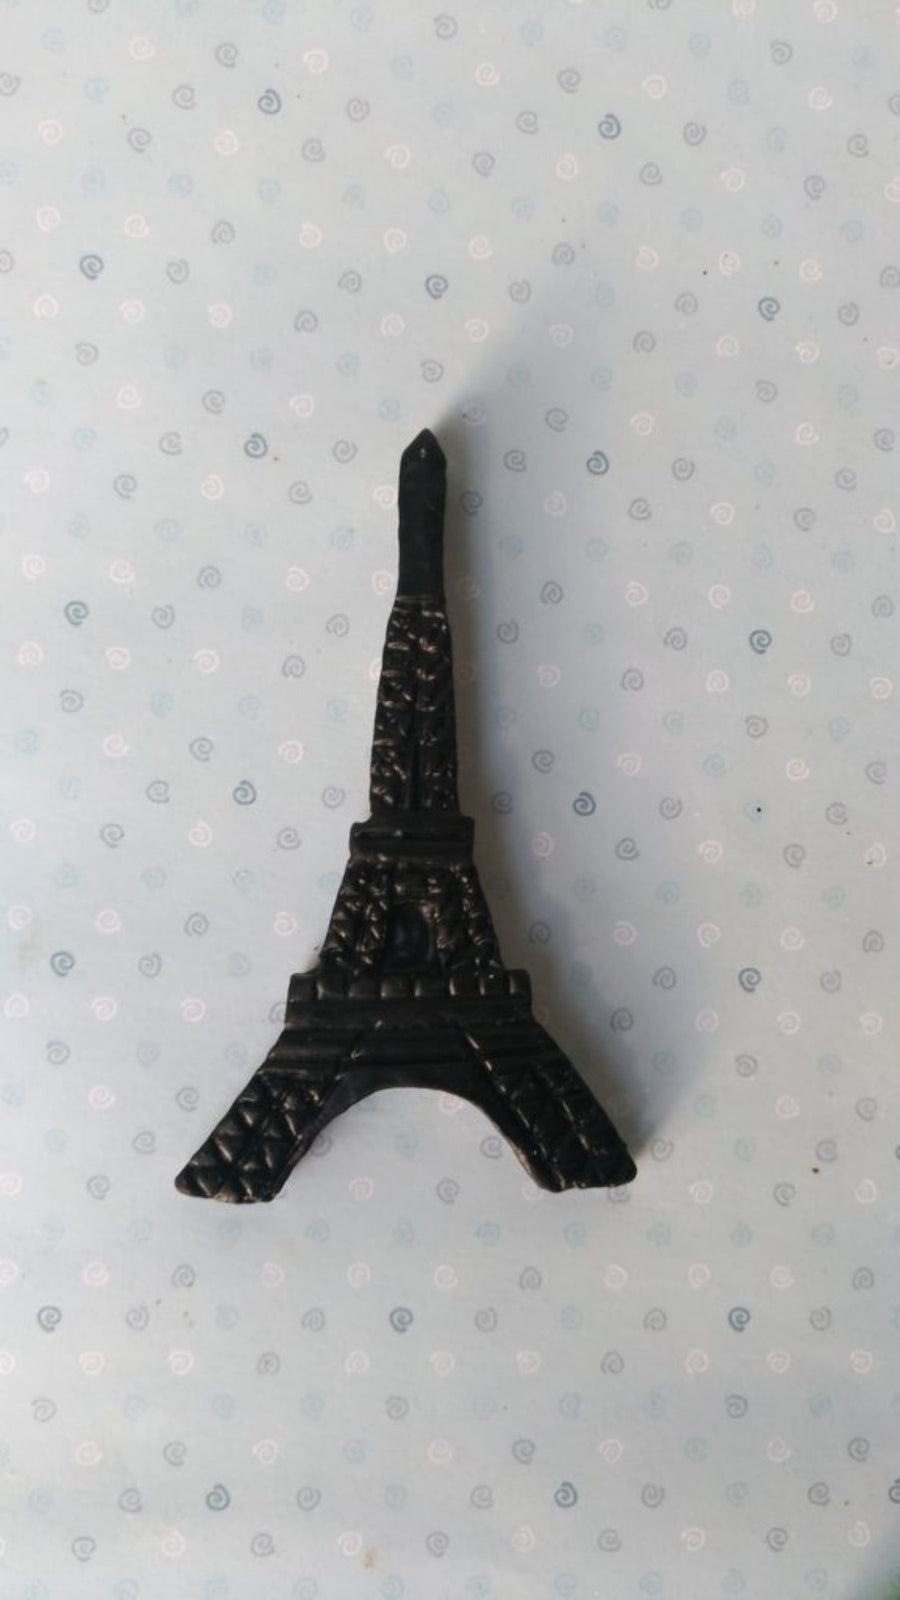 Eiffel Tower (Med) Silicone Mold 100MA